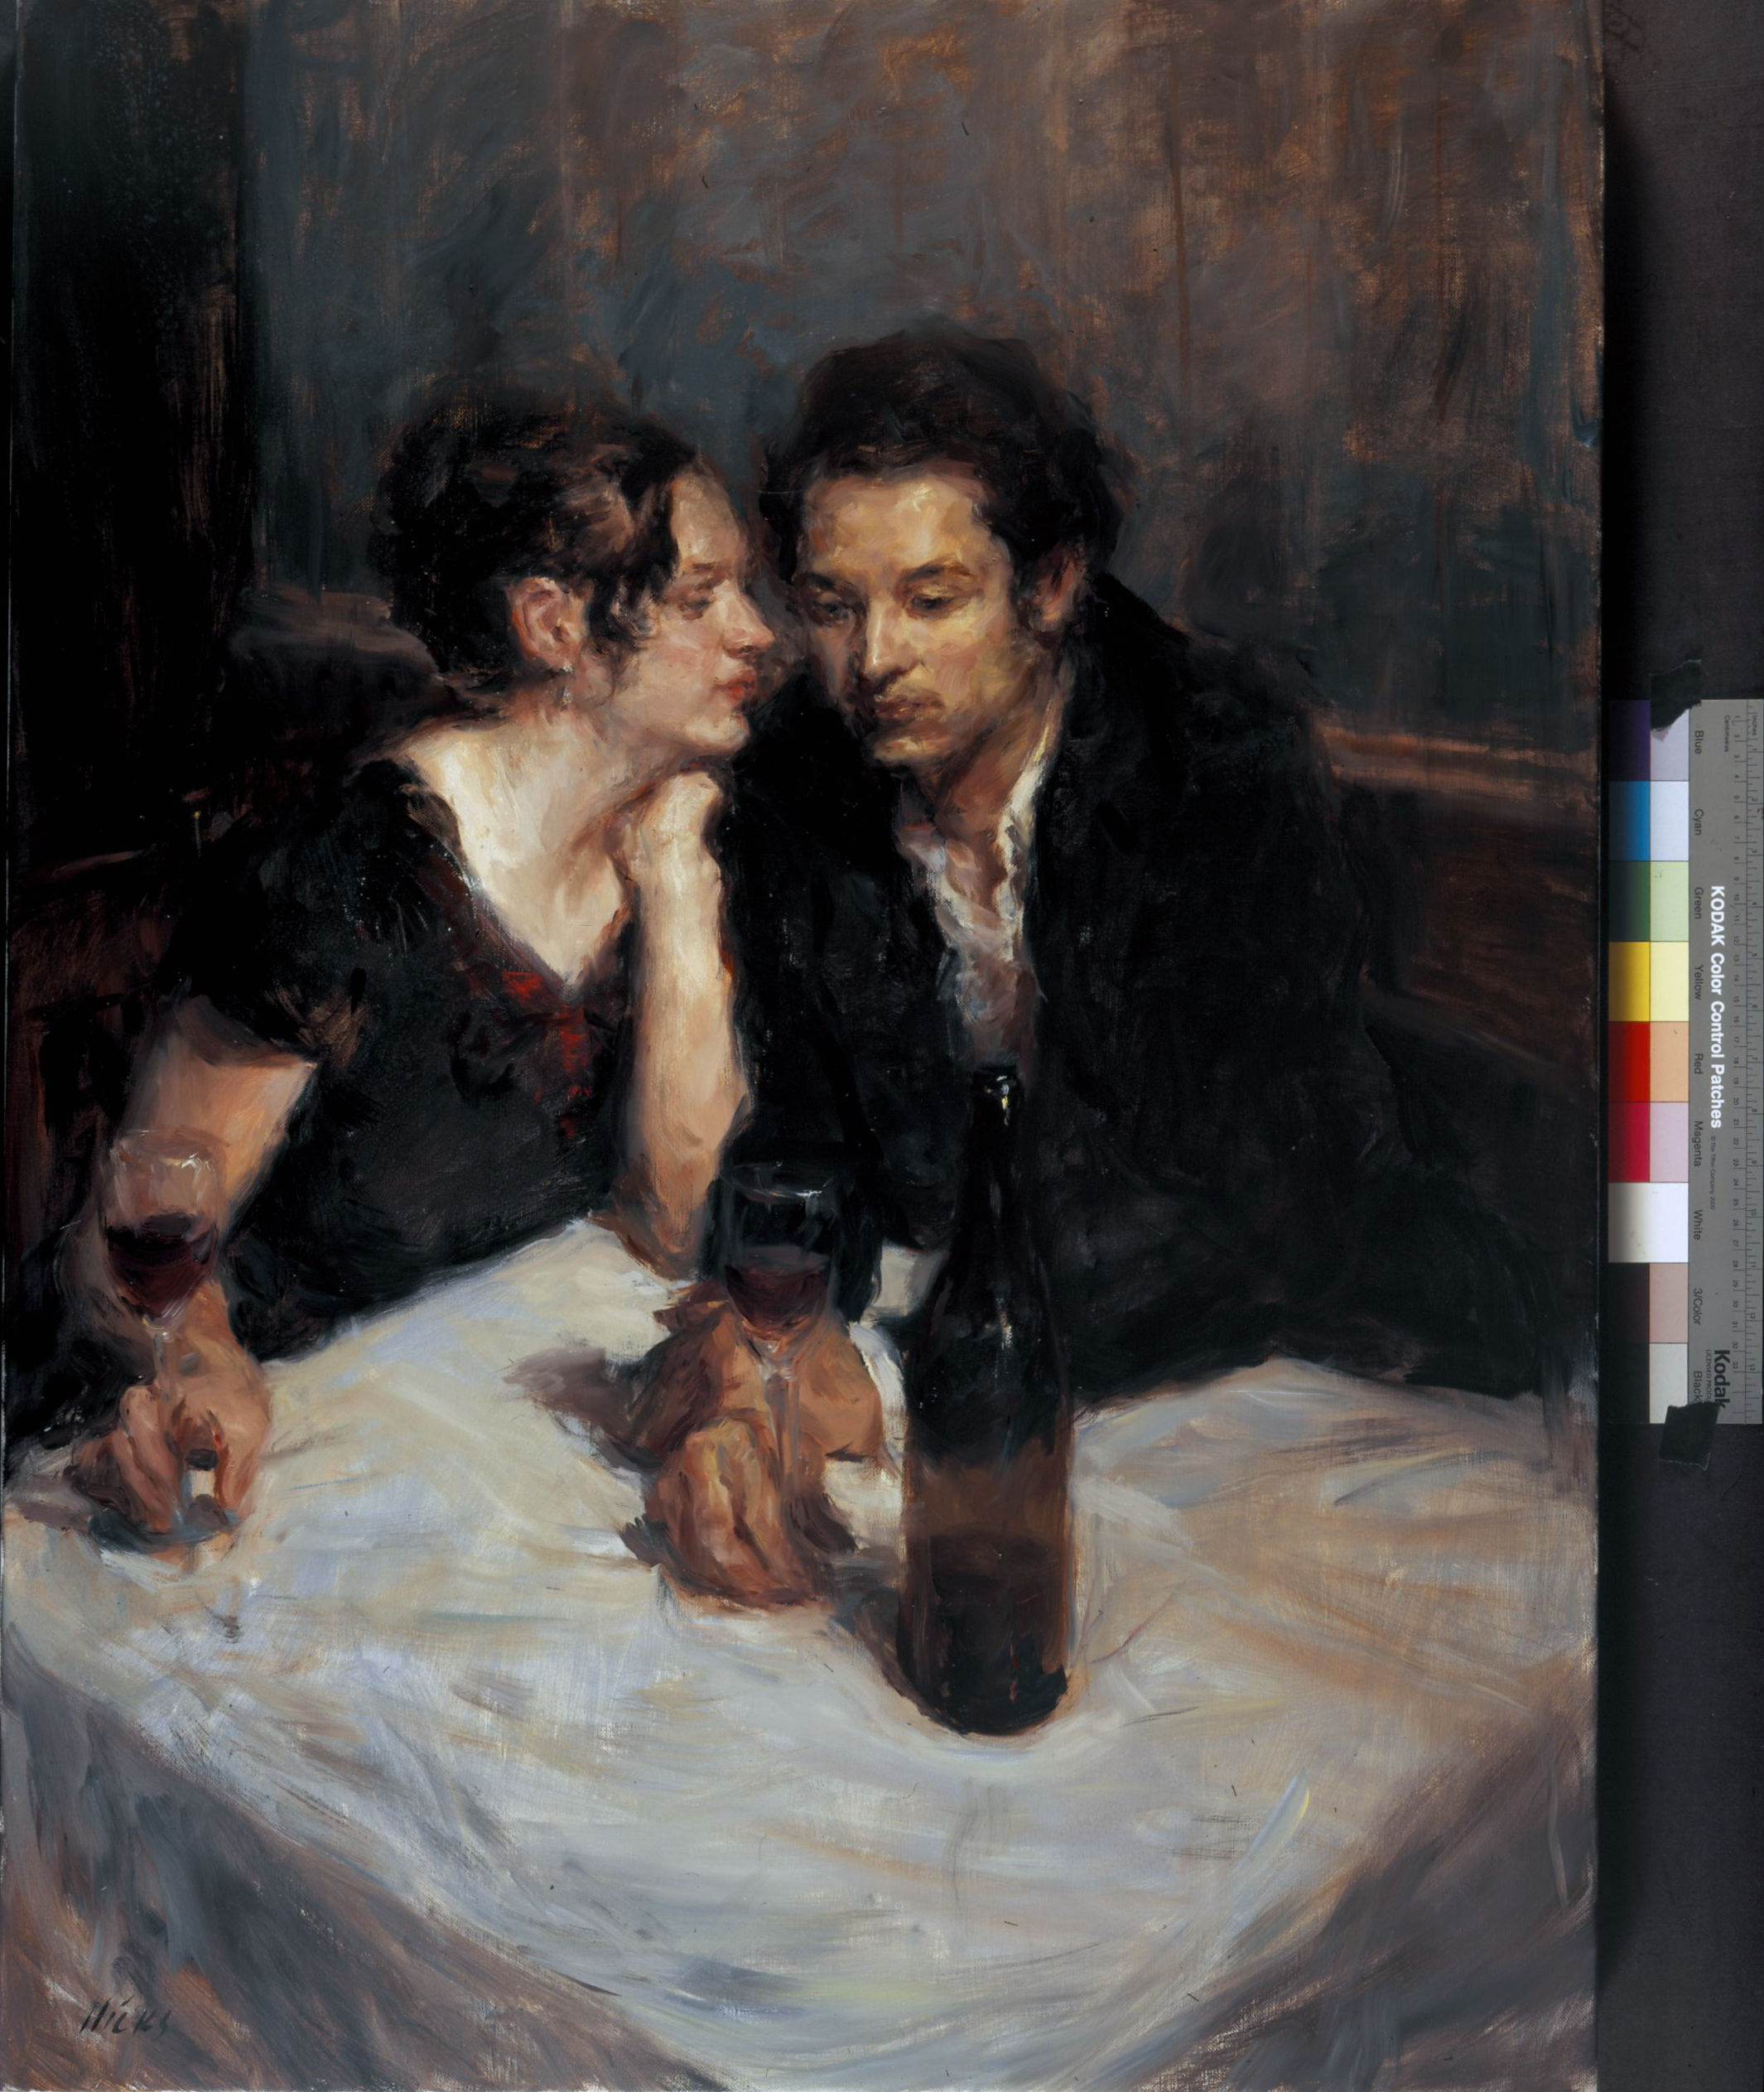 Figurative art - Ron Hicks, "Sweet Nothings," 40 x 30 inches, Oil on canvas